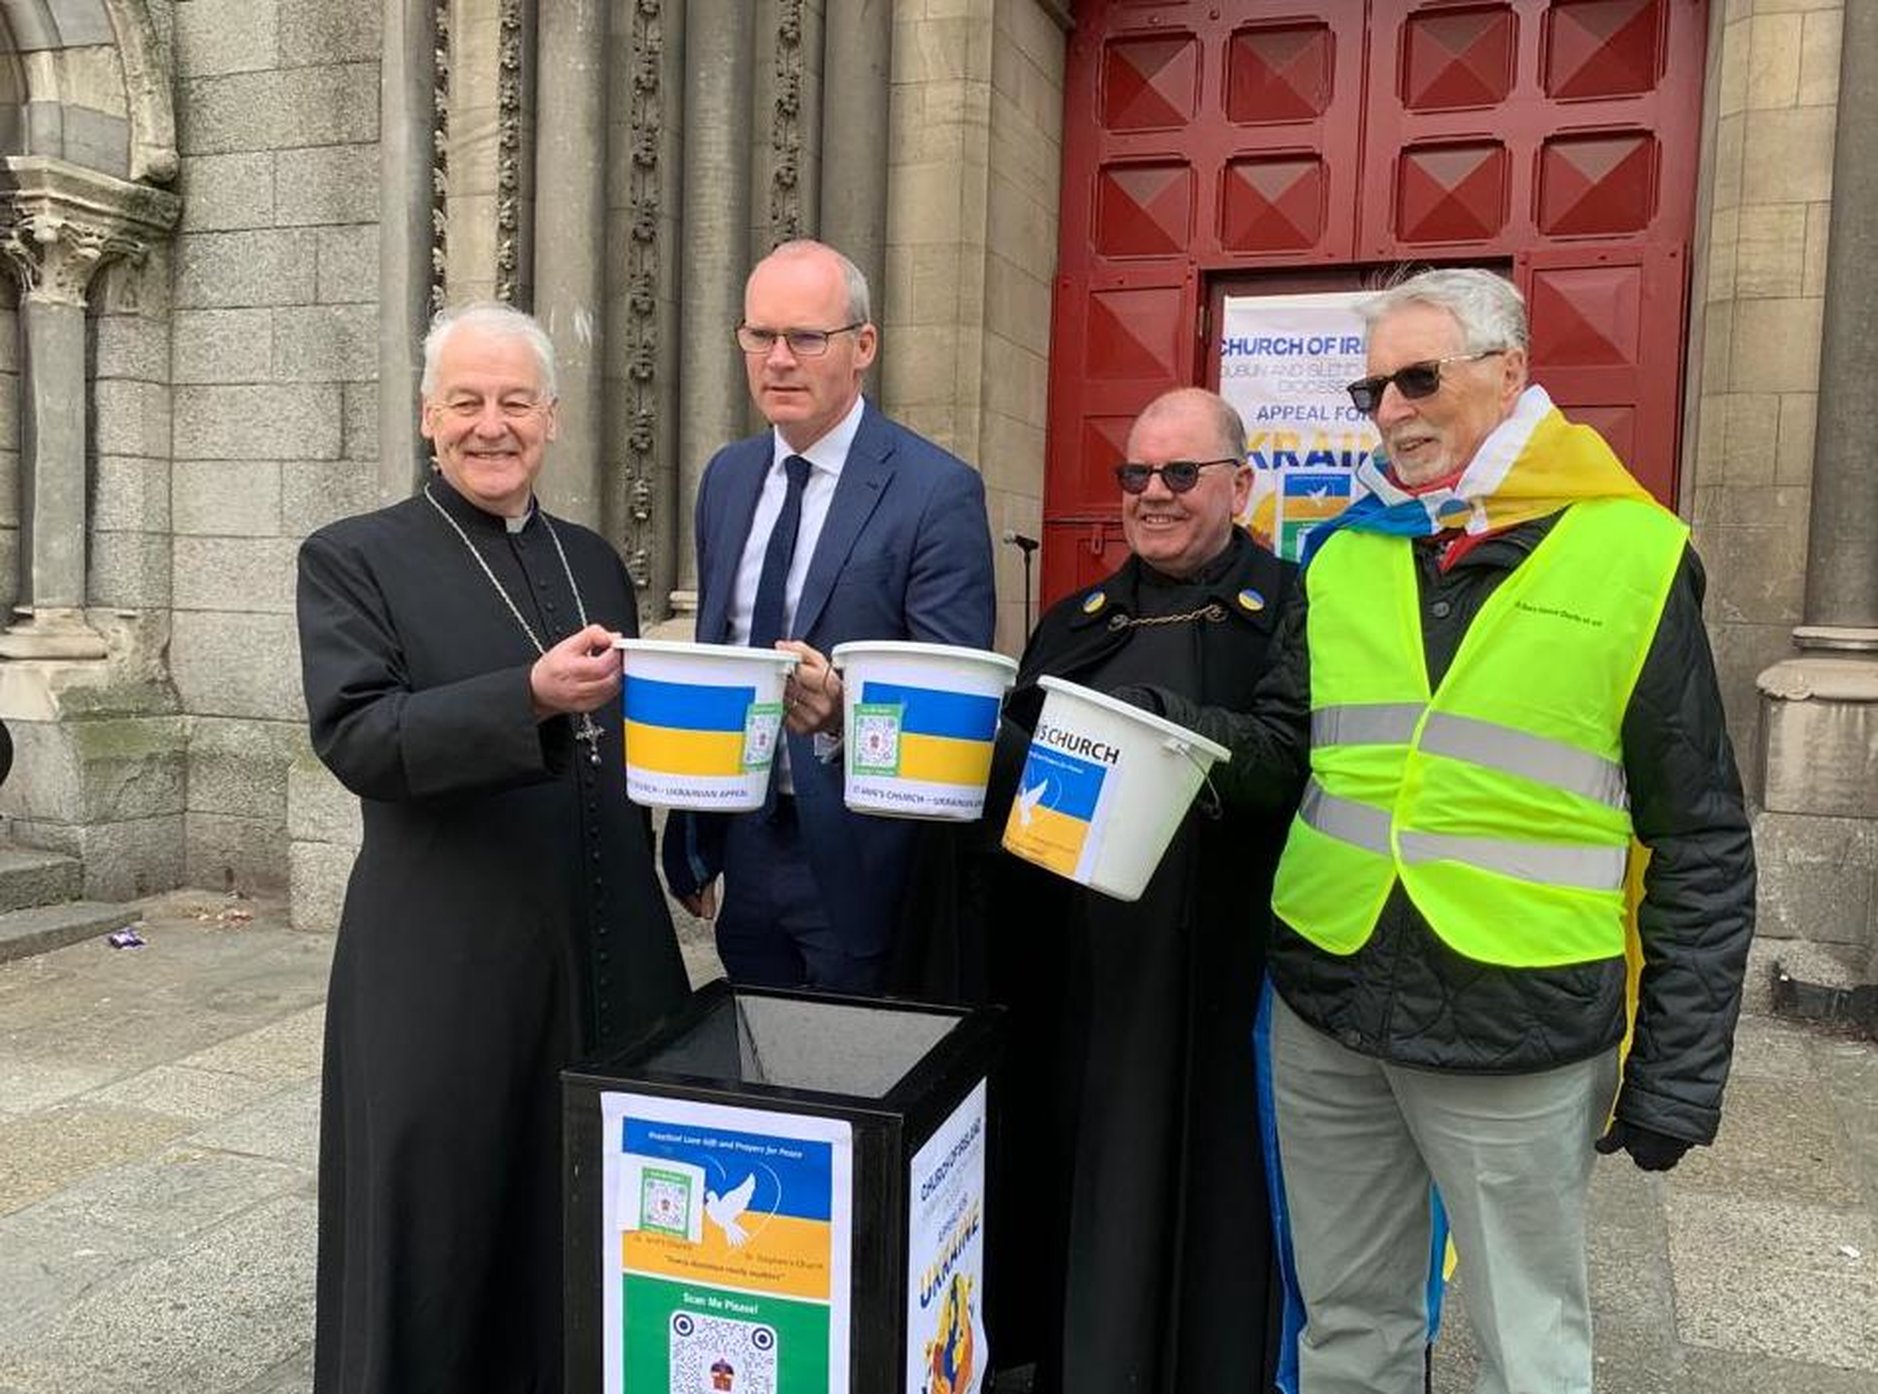 Archbishop Michael Jackson, Minister Simon Coveney, Fred Deane and Desmond Campbell at the launch of the Black Santa sit out for the Ukraine appeal at St Ann's.